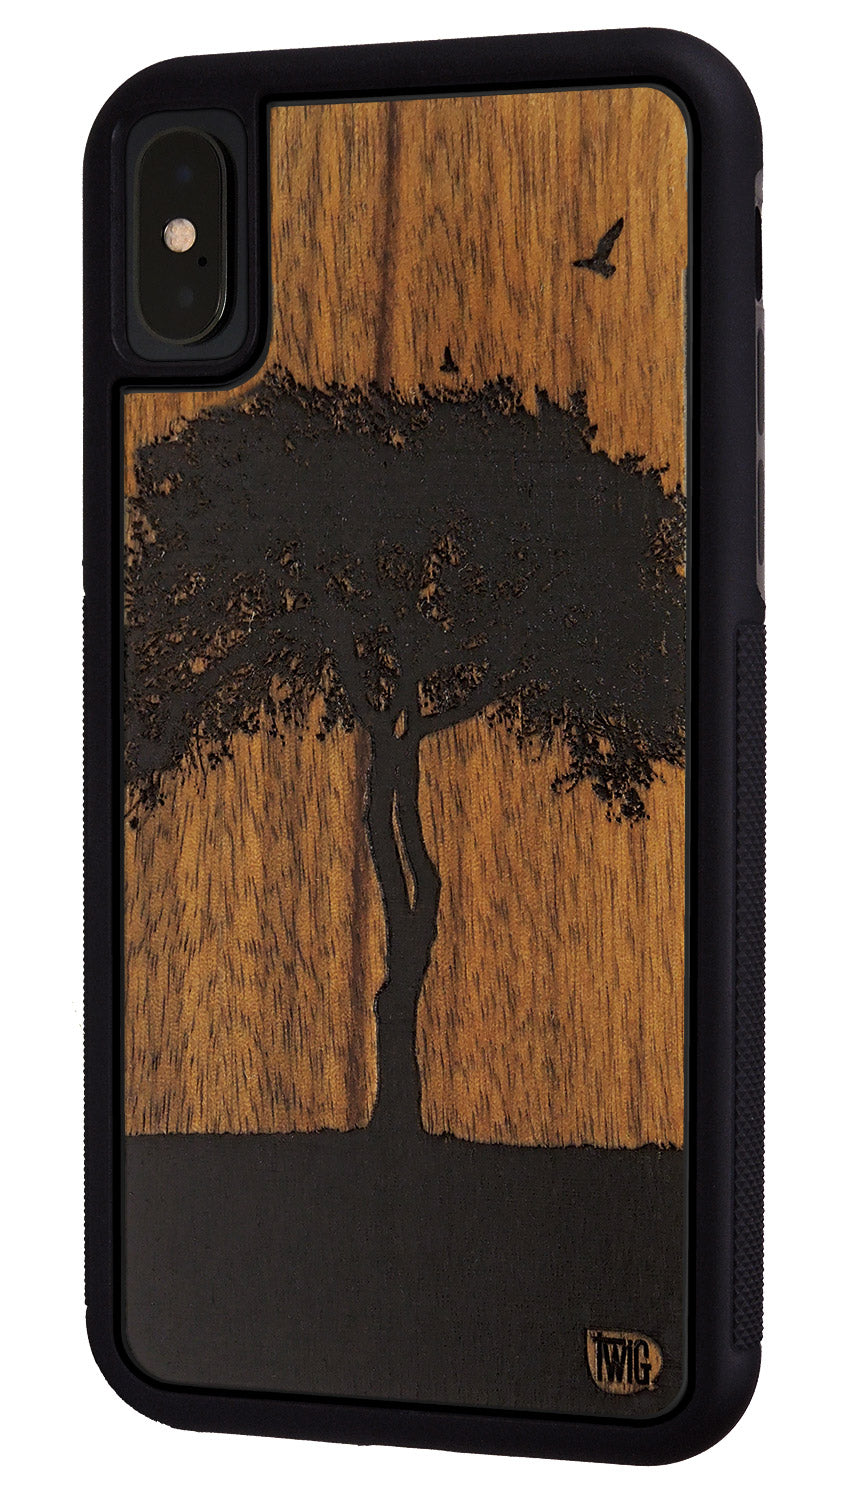 The One Tree - Walnut iPhone Case, iPhone Case - Twig Case Co.